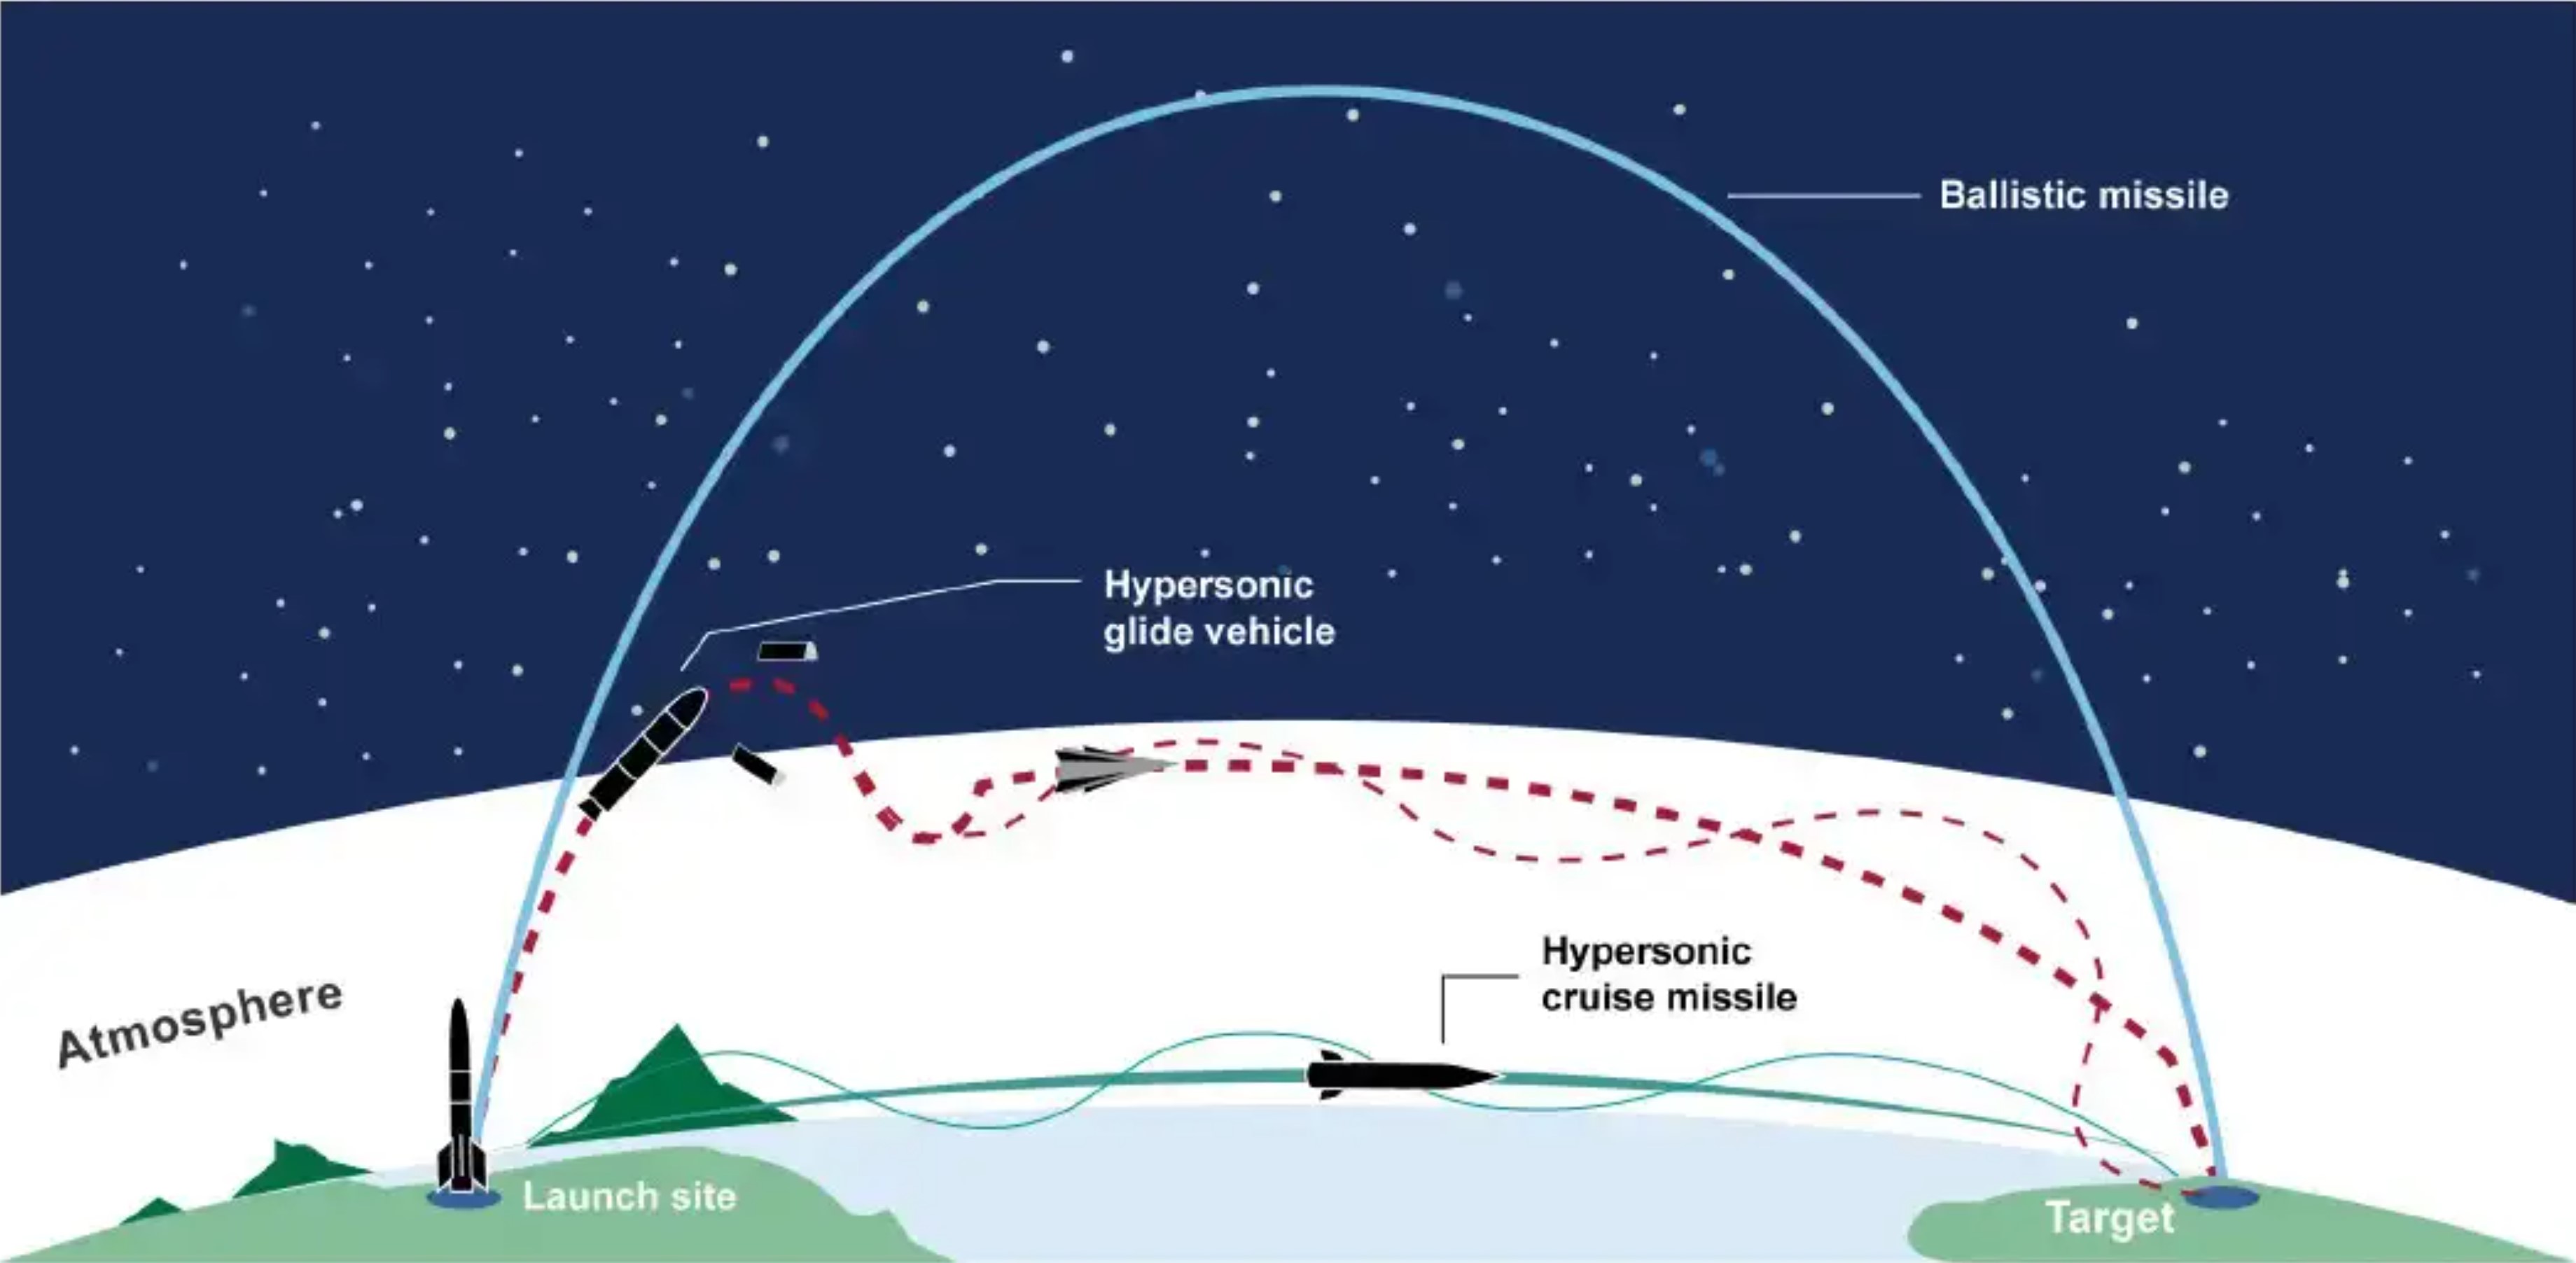 A depiction of various missile trajectories.